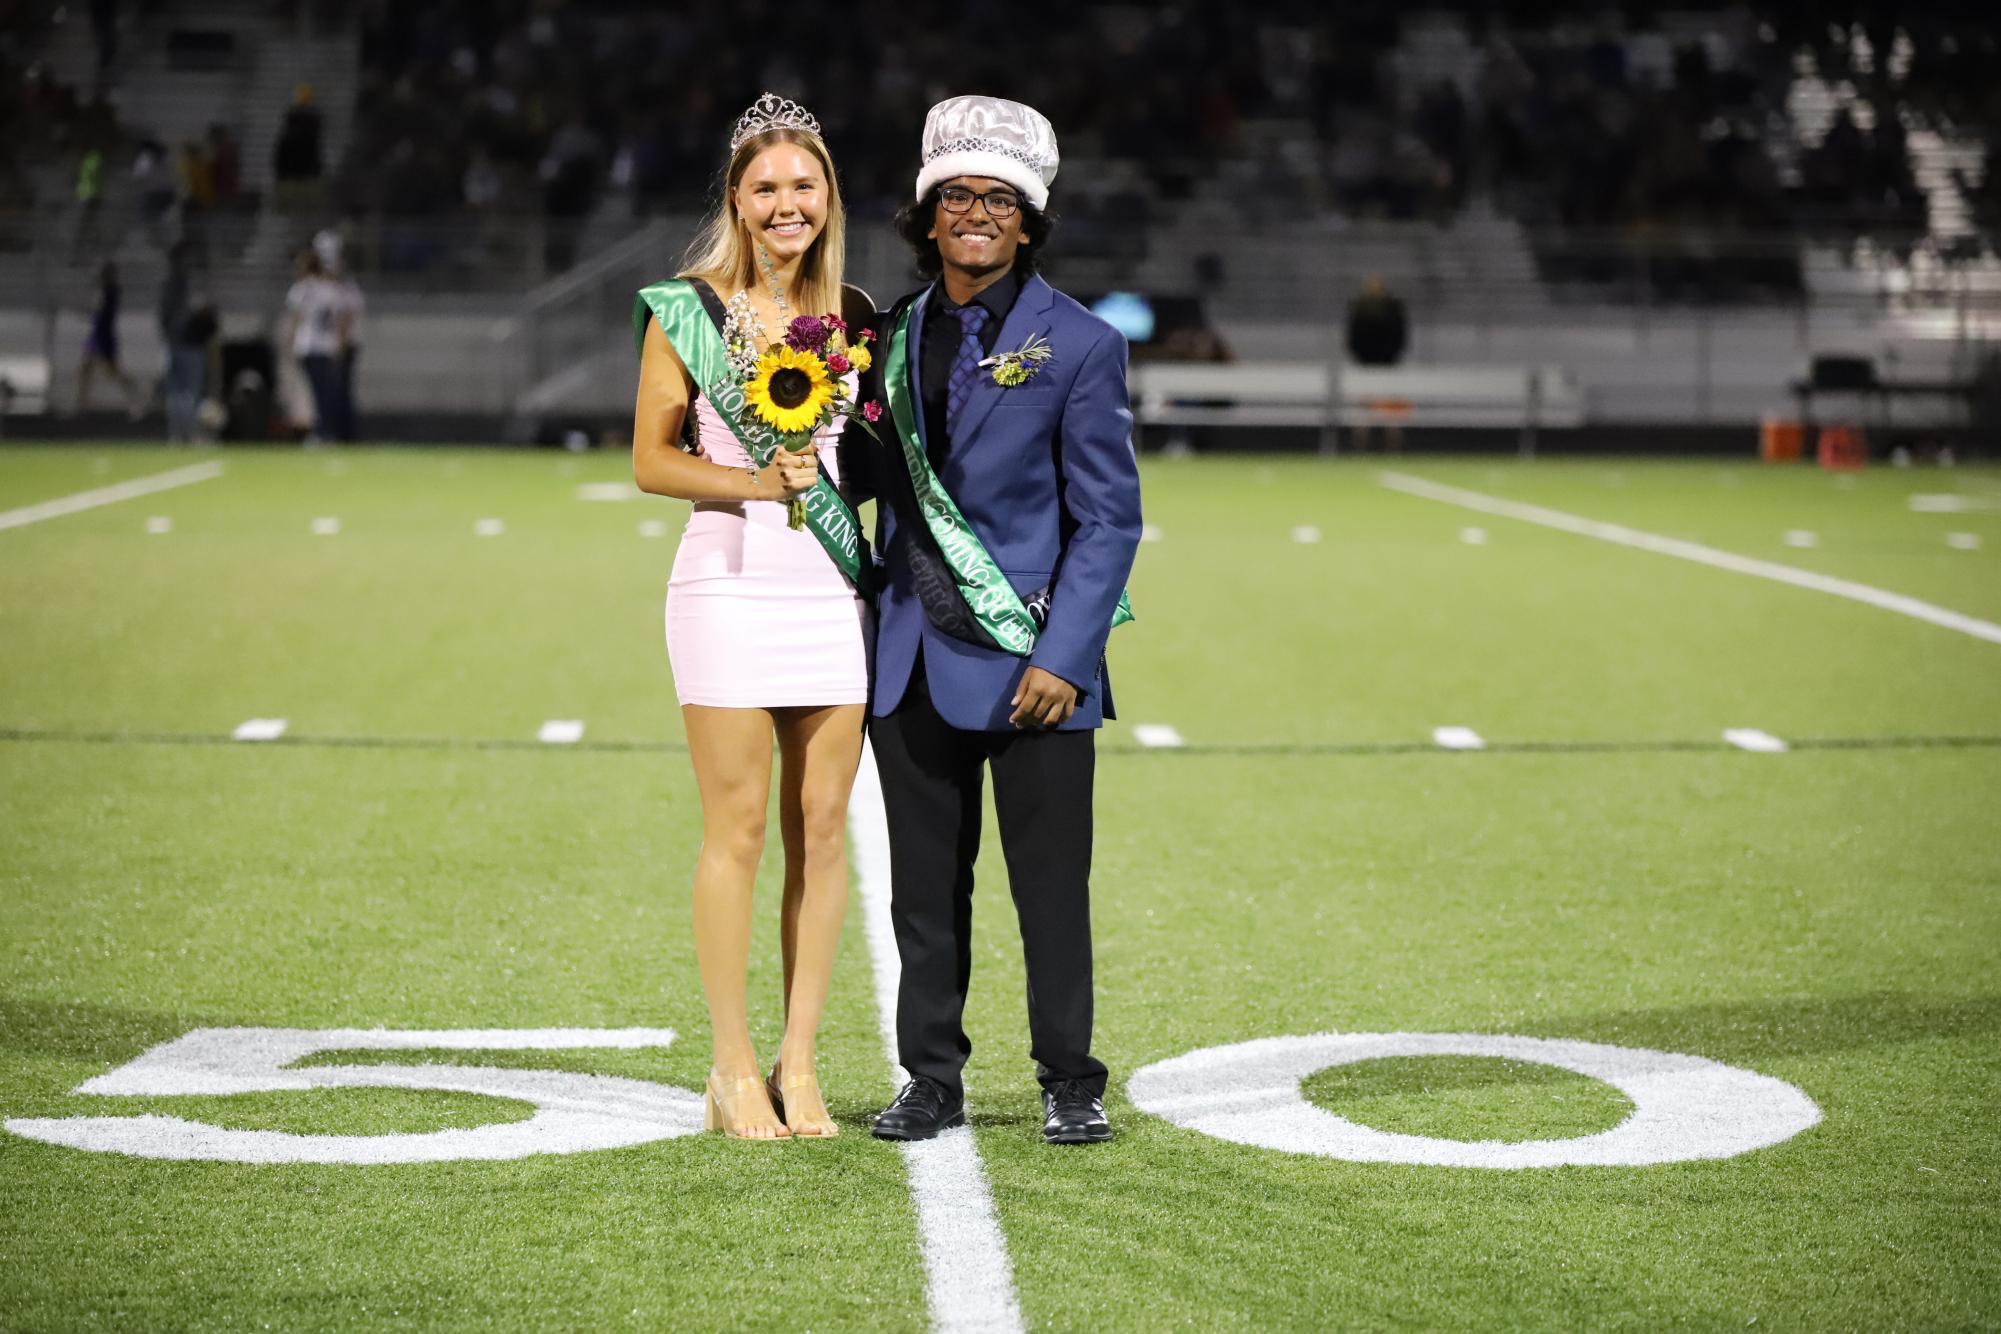 GALLERY: Homecoming Royalty